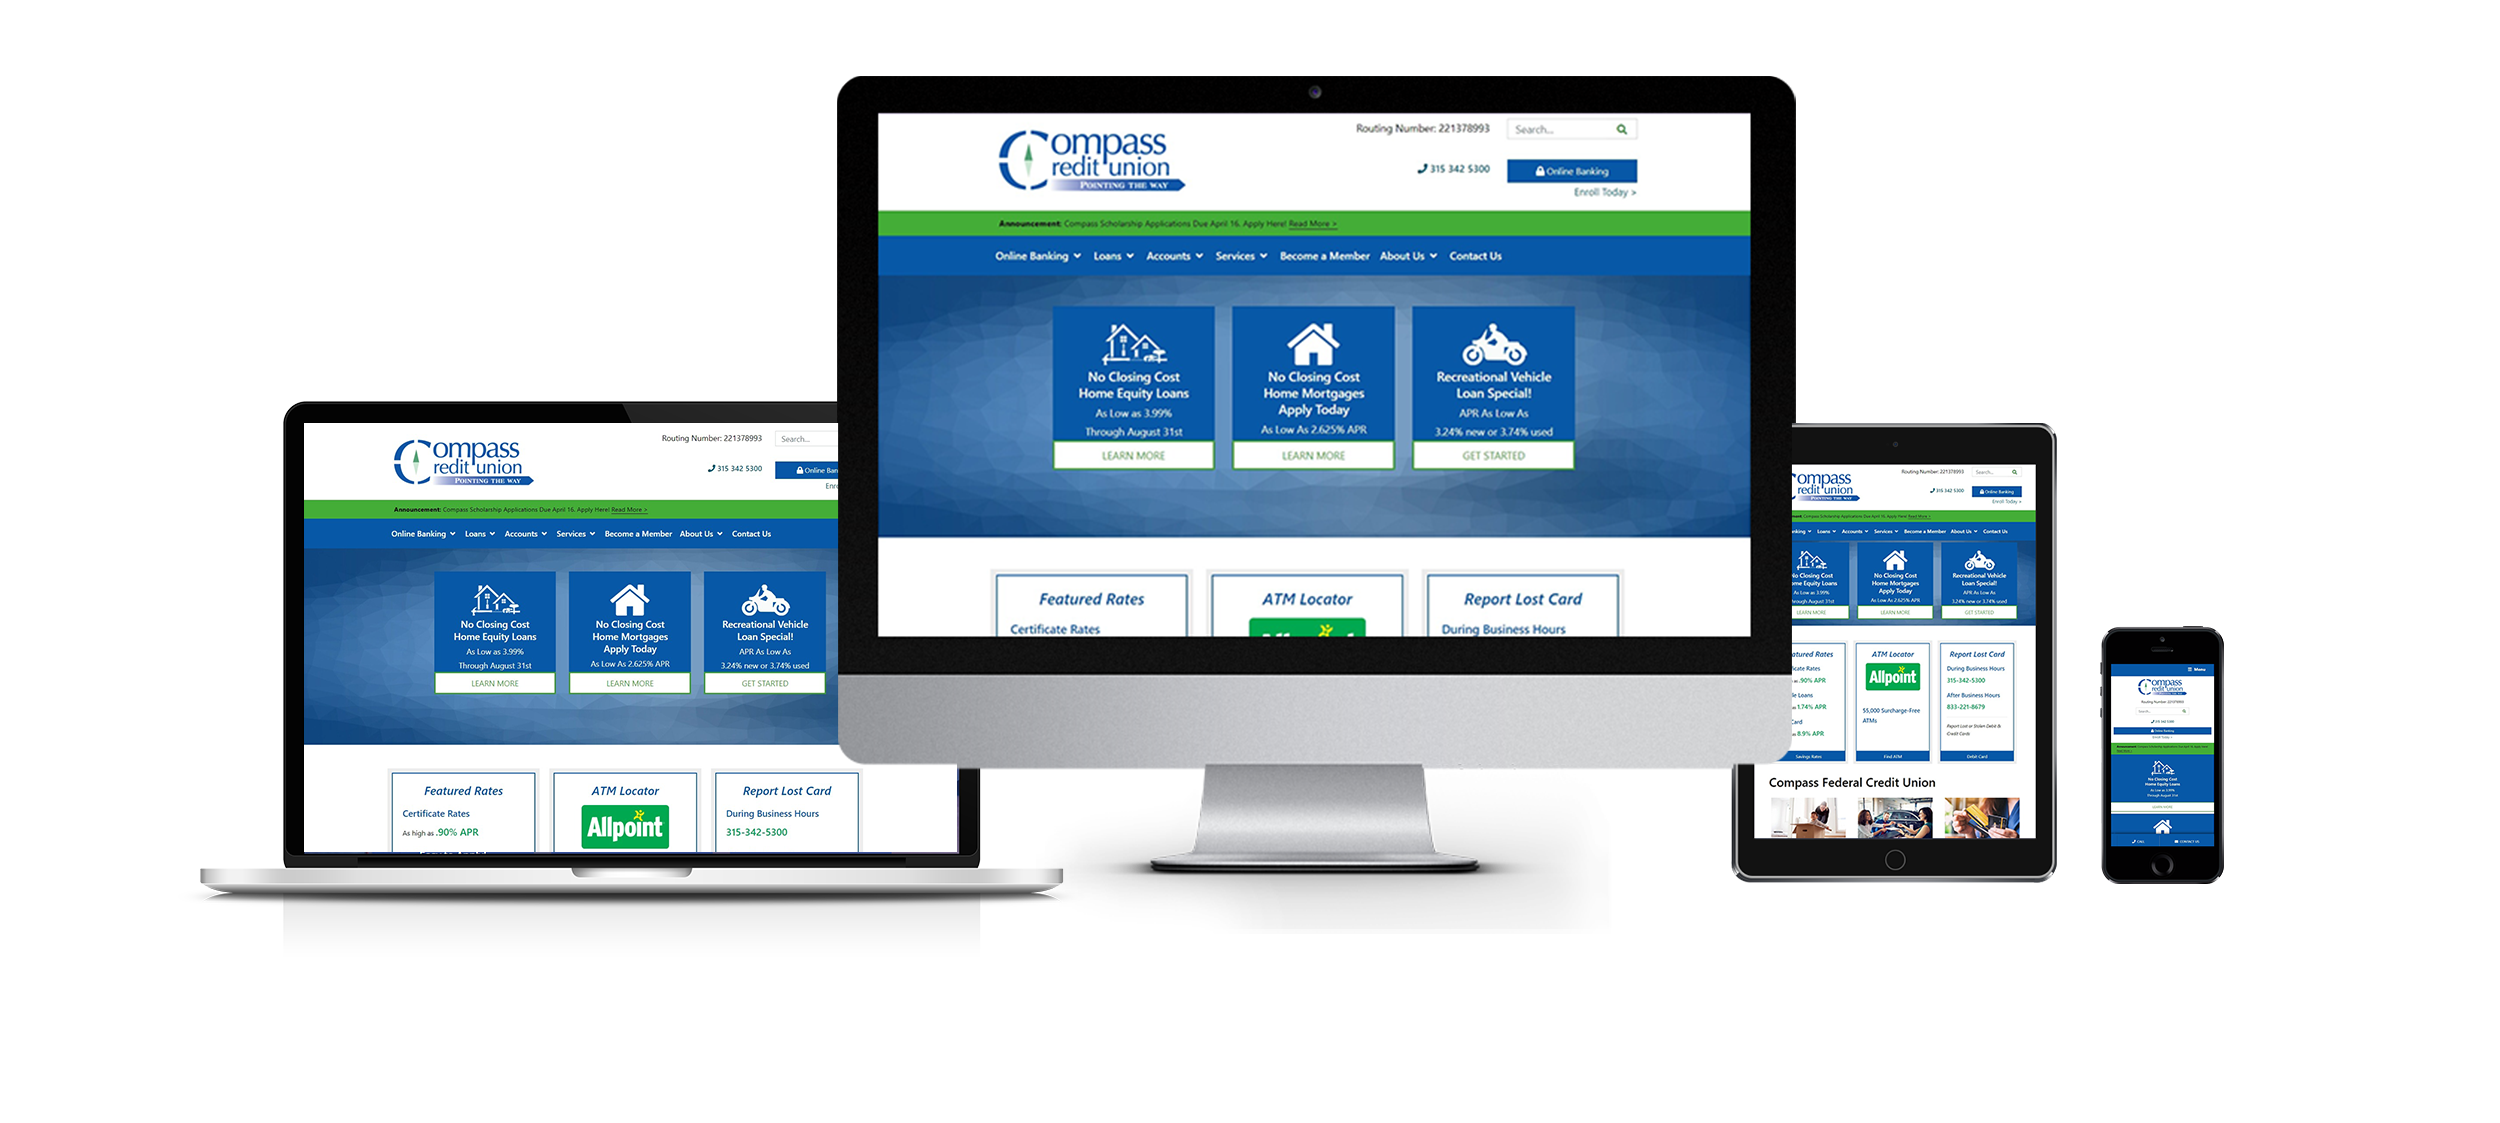 ada compliant website design responsive website design for compass federal credit union image of website on various devices